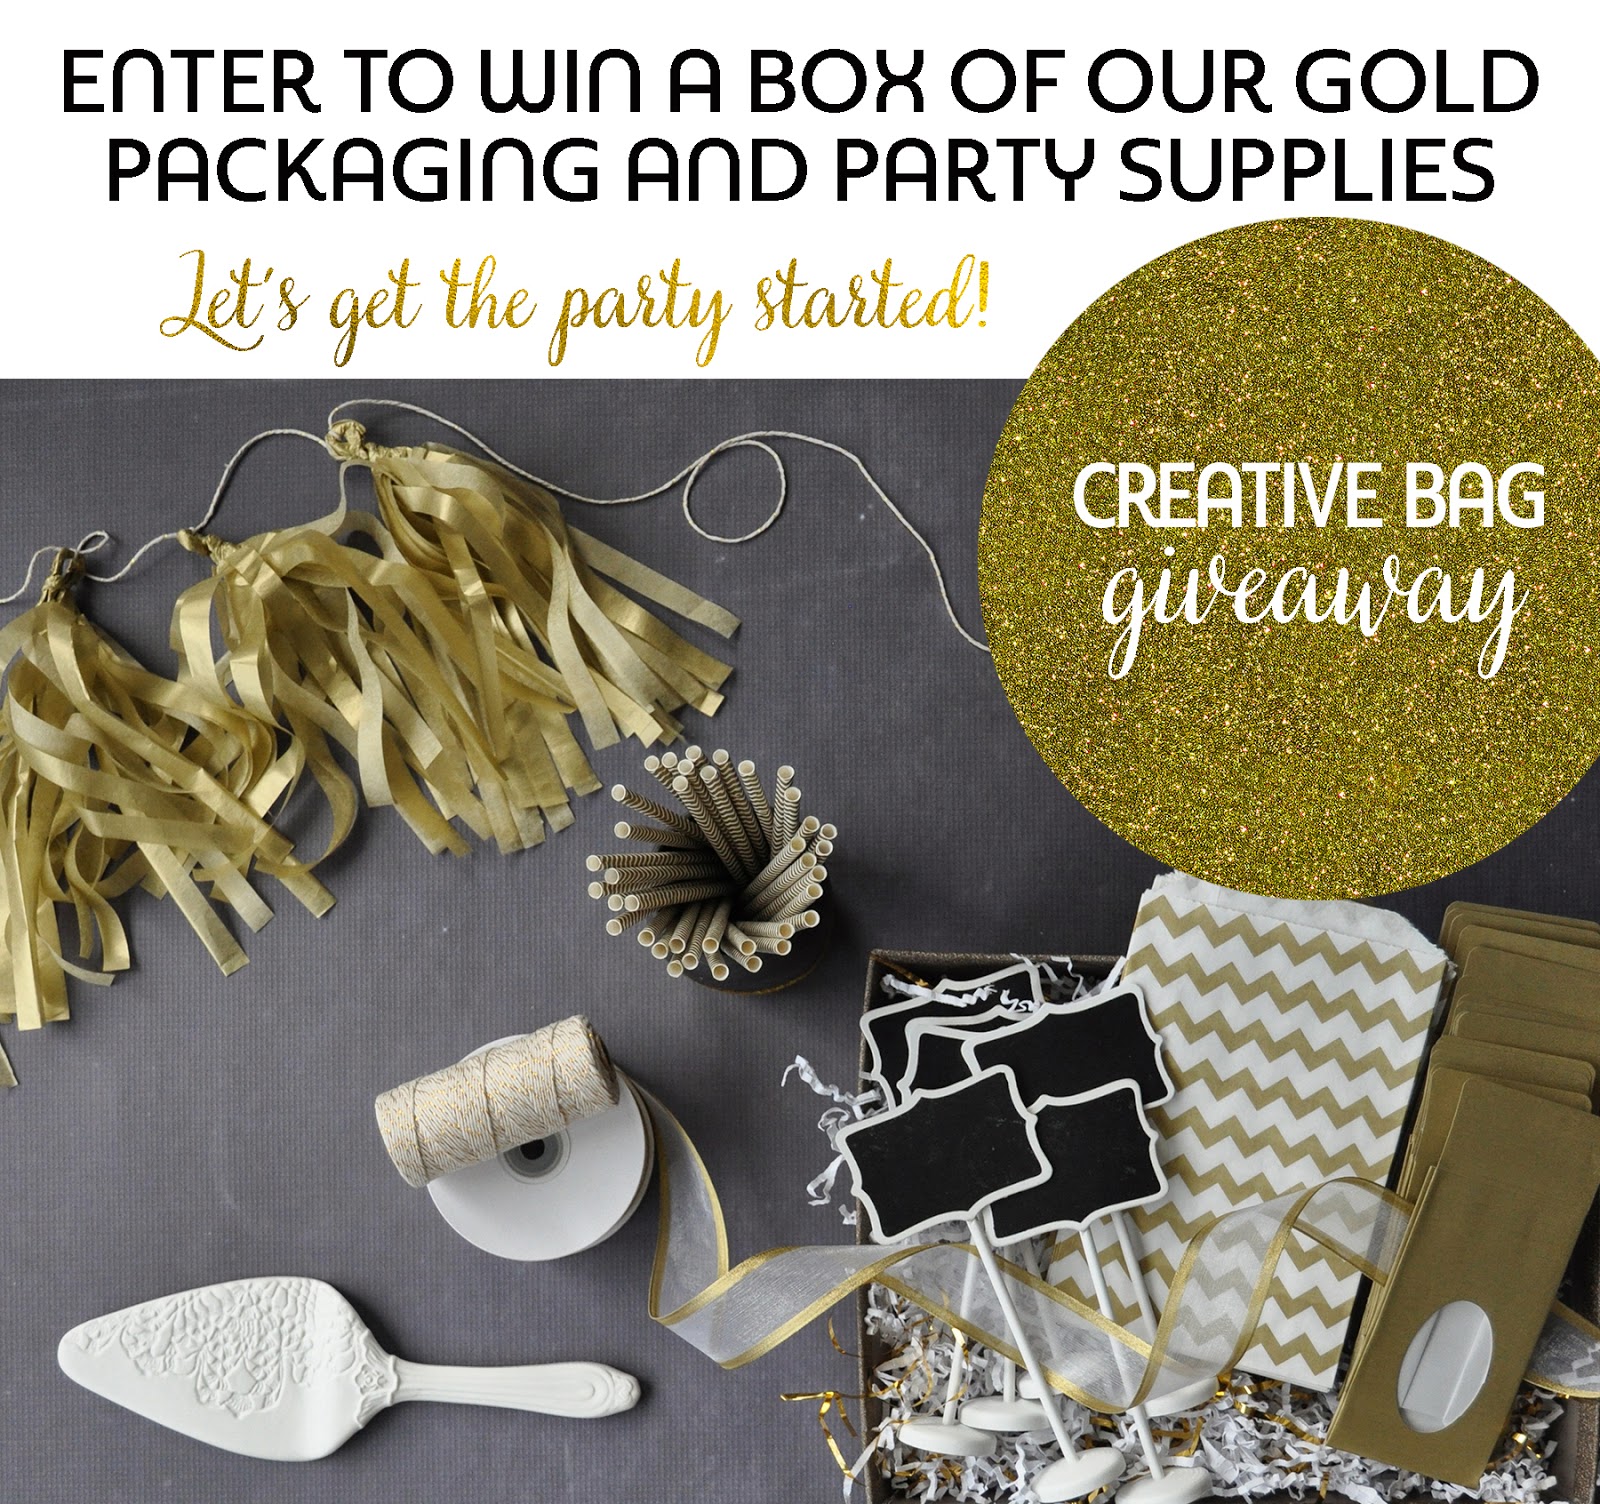 Enter to win a box of gold packaging and party supplies | Creative Bag